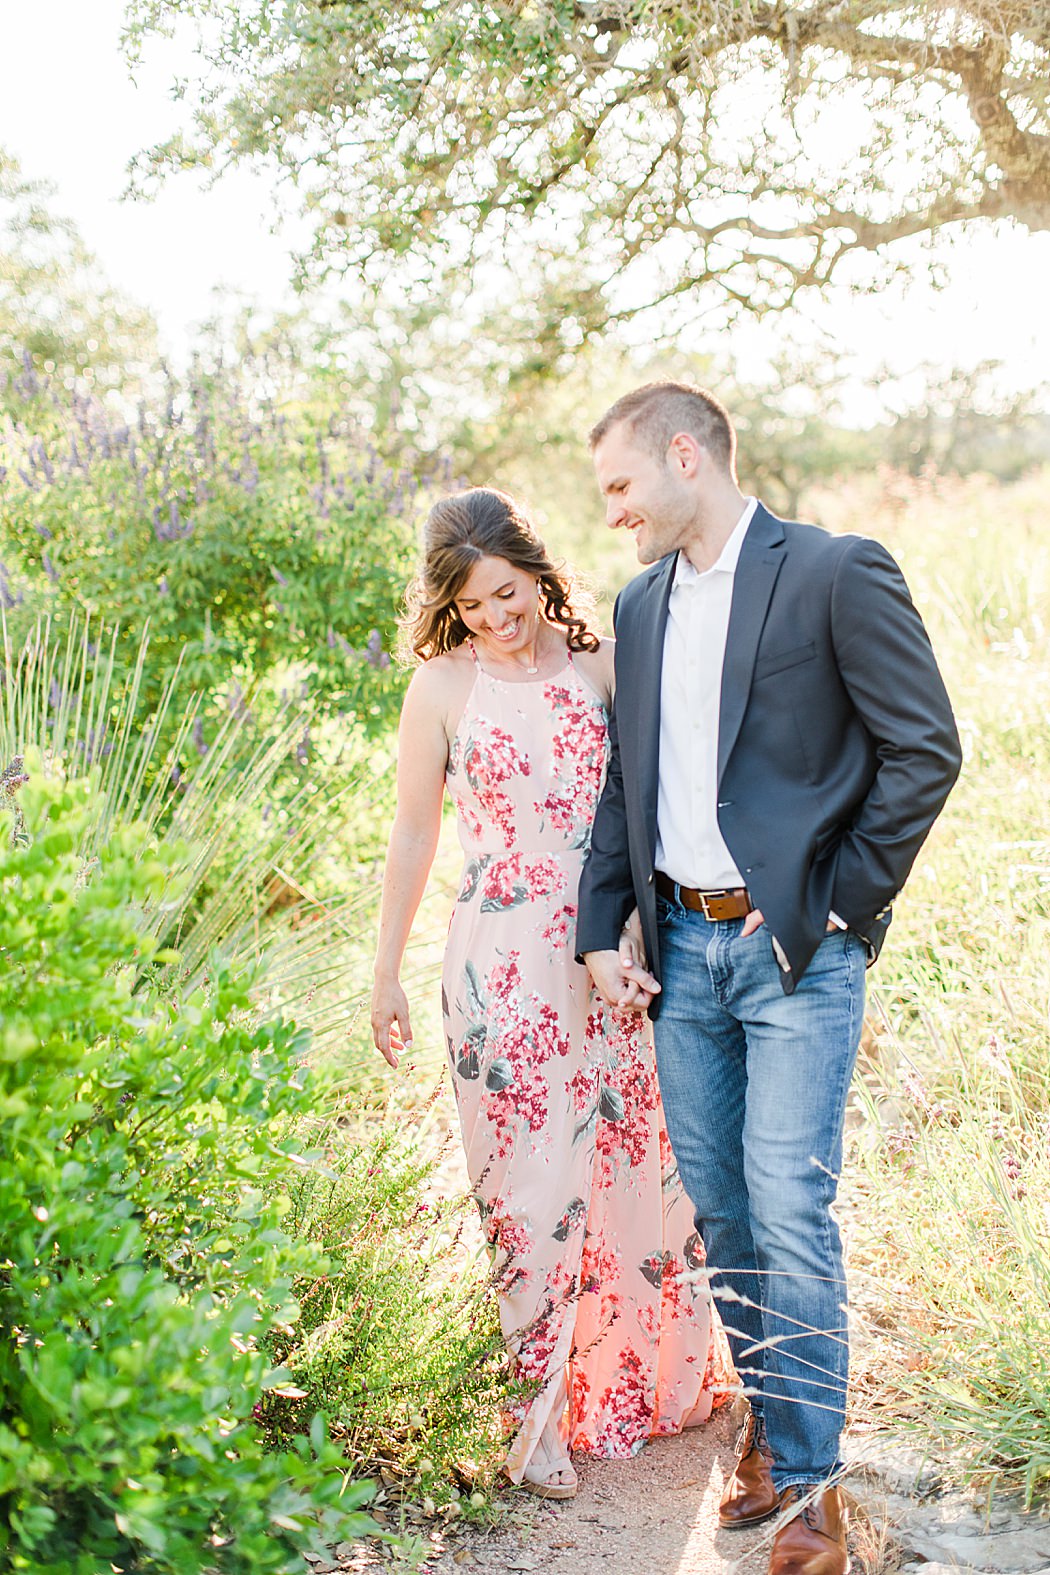 Contigo Ranch Engagement Session in Fredericksburg texas by Allison Jeffers Photography 0033